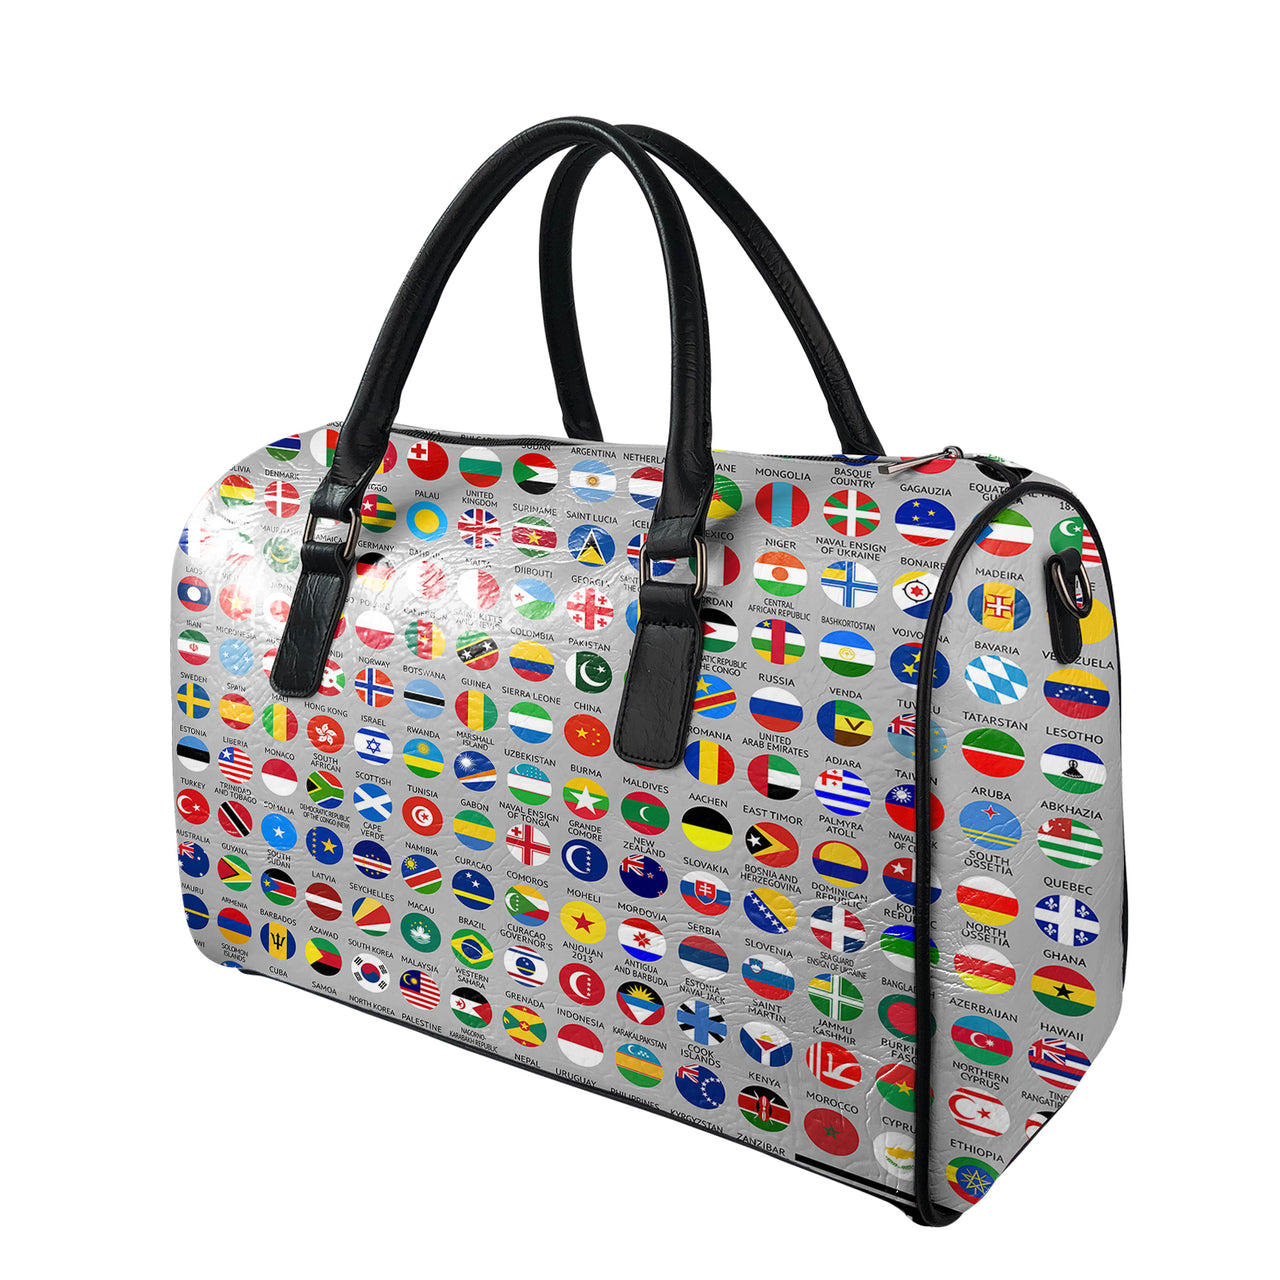 220 World's Flags Designed Leather Travel Bag